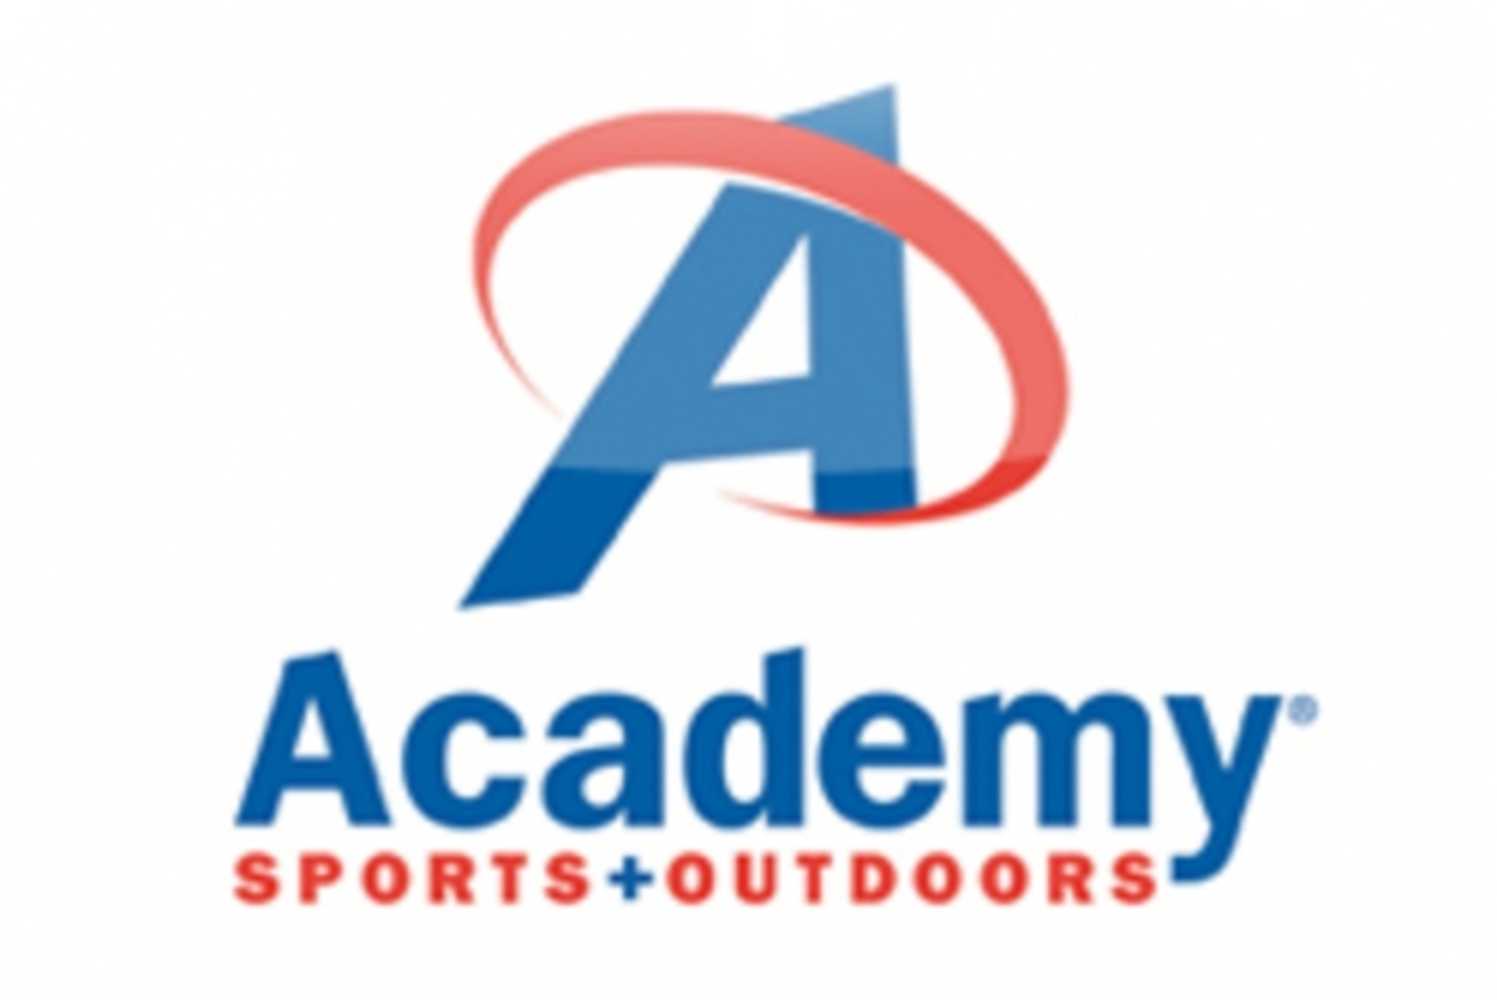 HCC Gets The Job Done, For Academy Sports + Outdoors